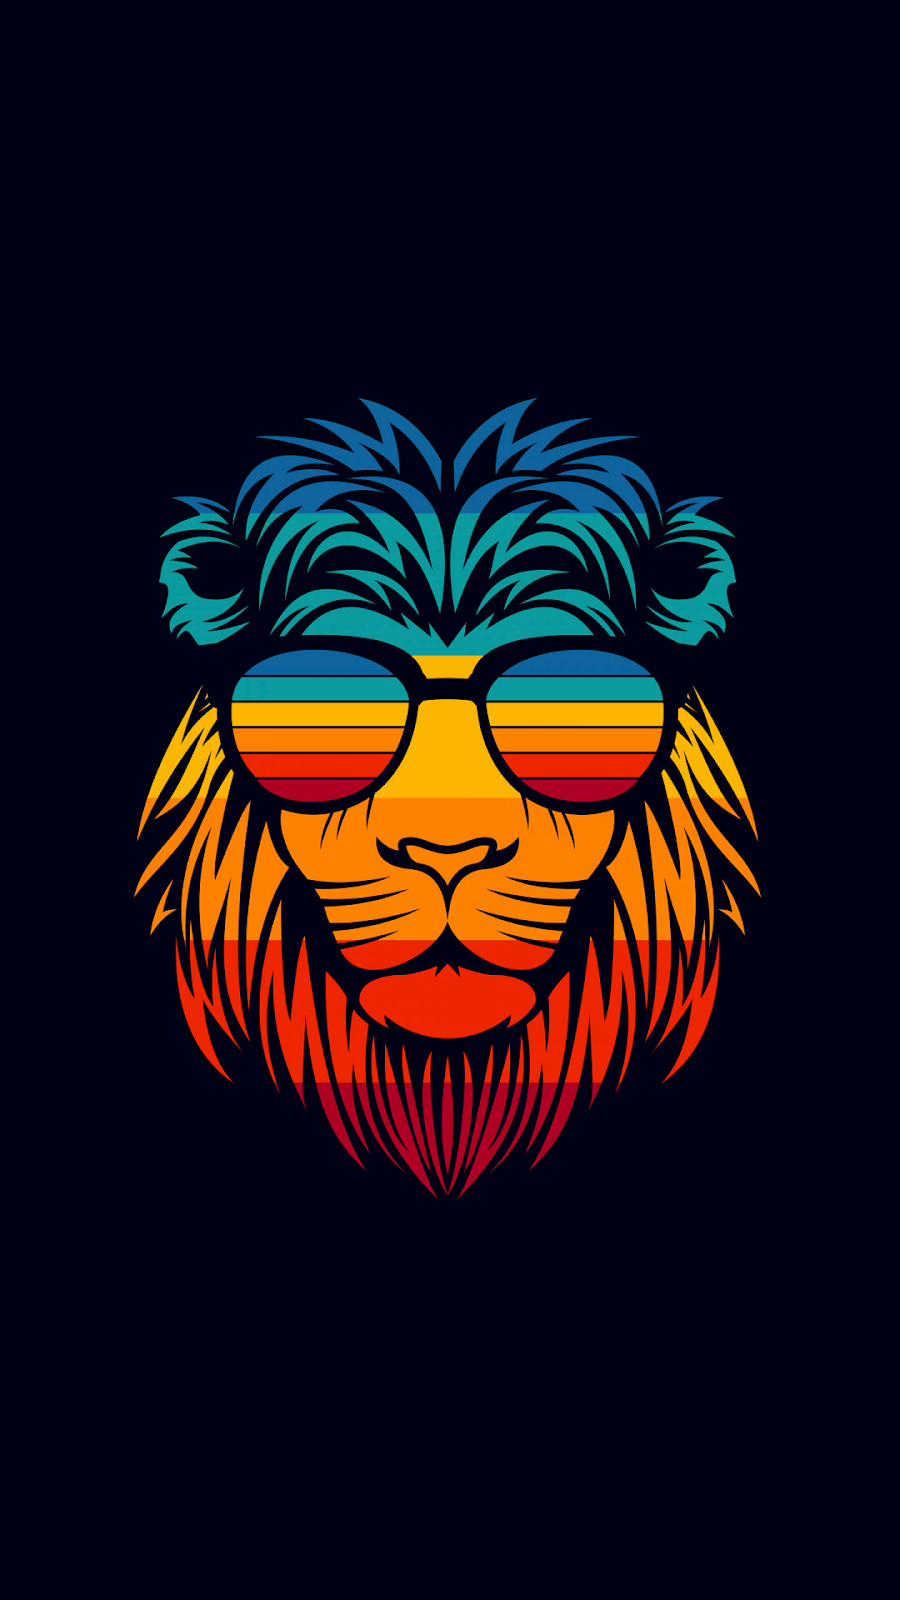 A lion with sunglasses on its face - Lion